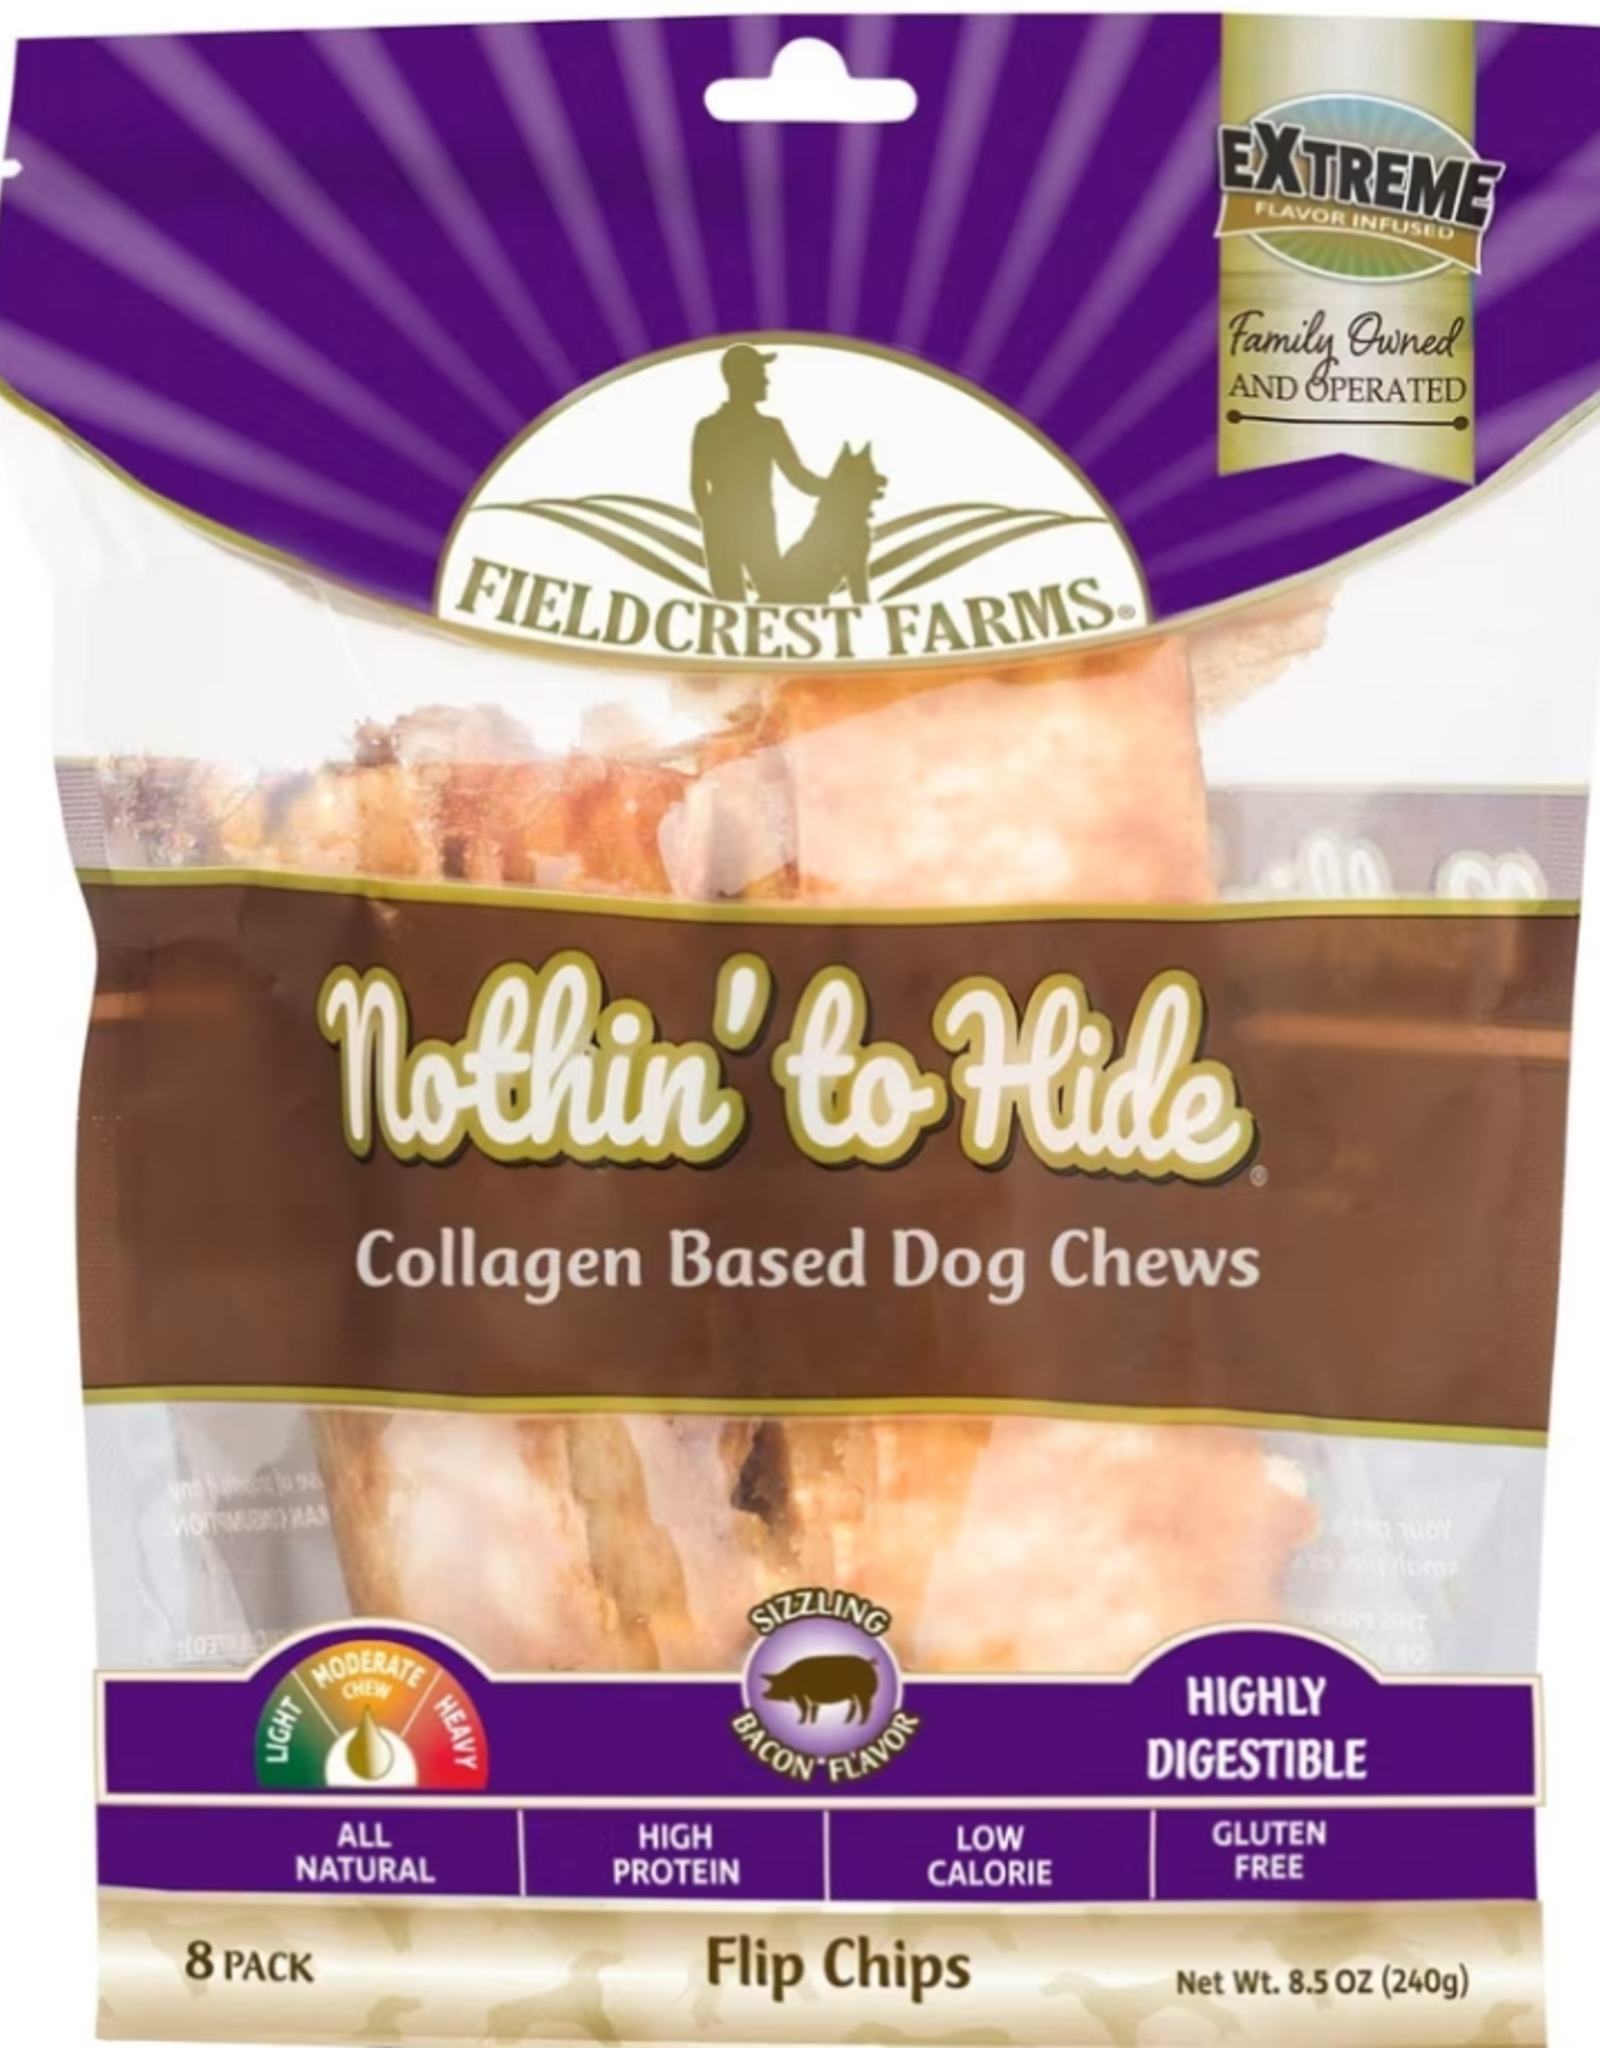 ETHICAL PRODUCTS, INC. NOTHIN  TO HIDE RAWHIDE ALTERNATIVE FLIP CHIP BACON 8PK